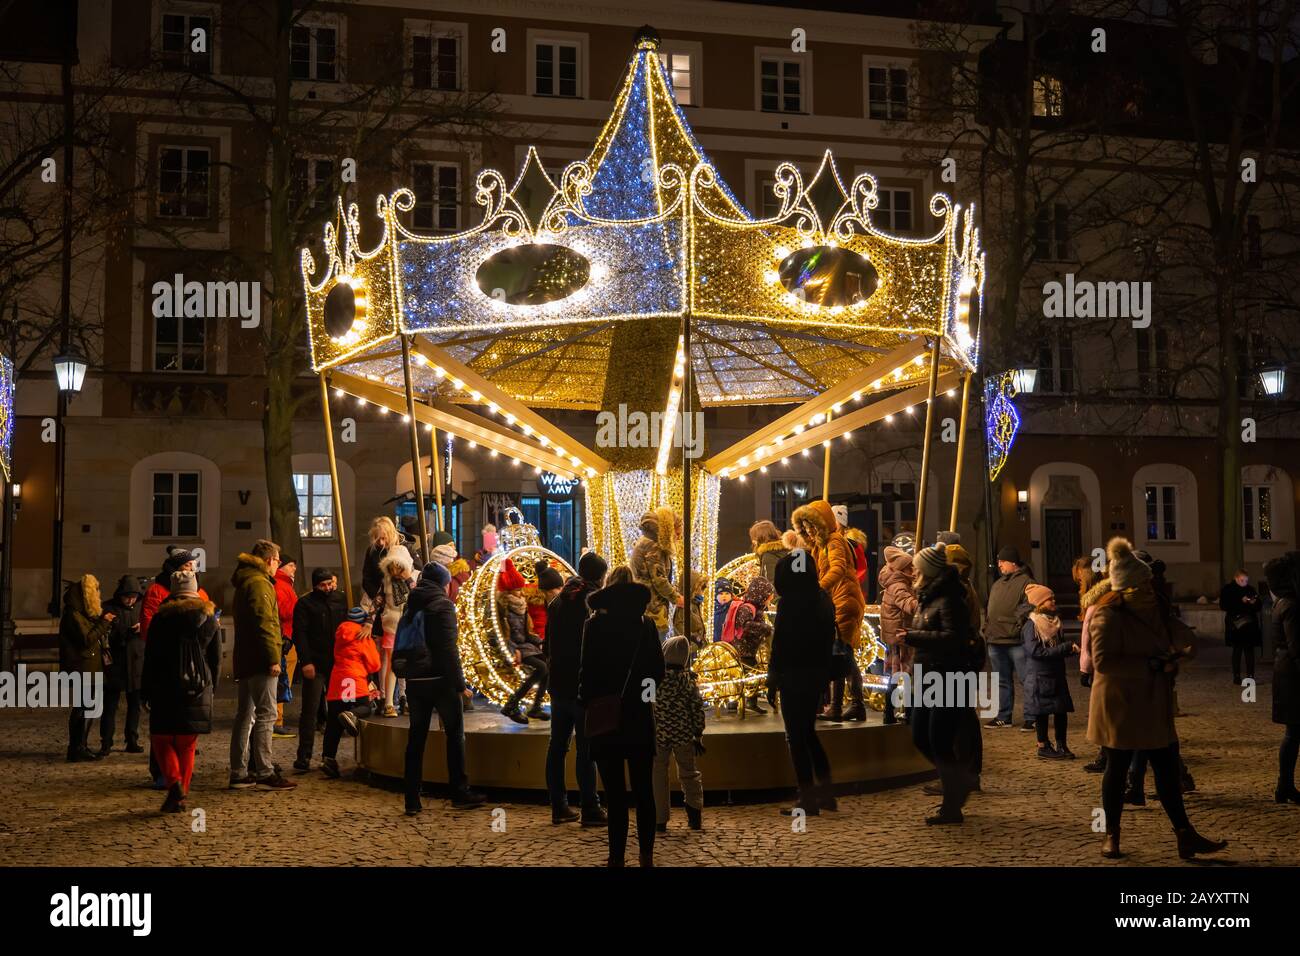 Warsaw, Poland - December 27, 2019: People with children having fun at carousel roundabout amusement ride at night during Christmas holiday season on Stock Photo